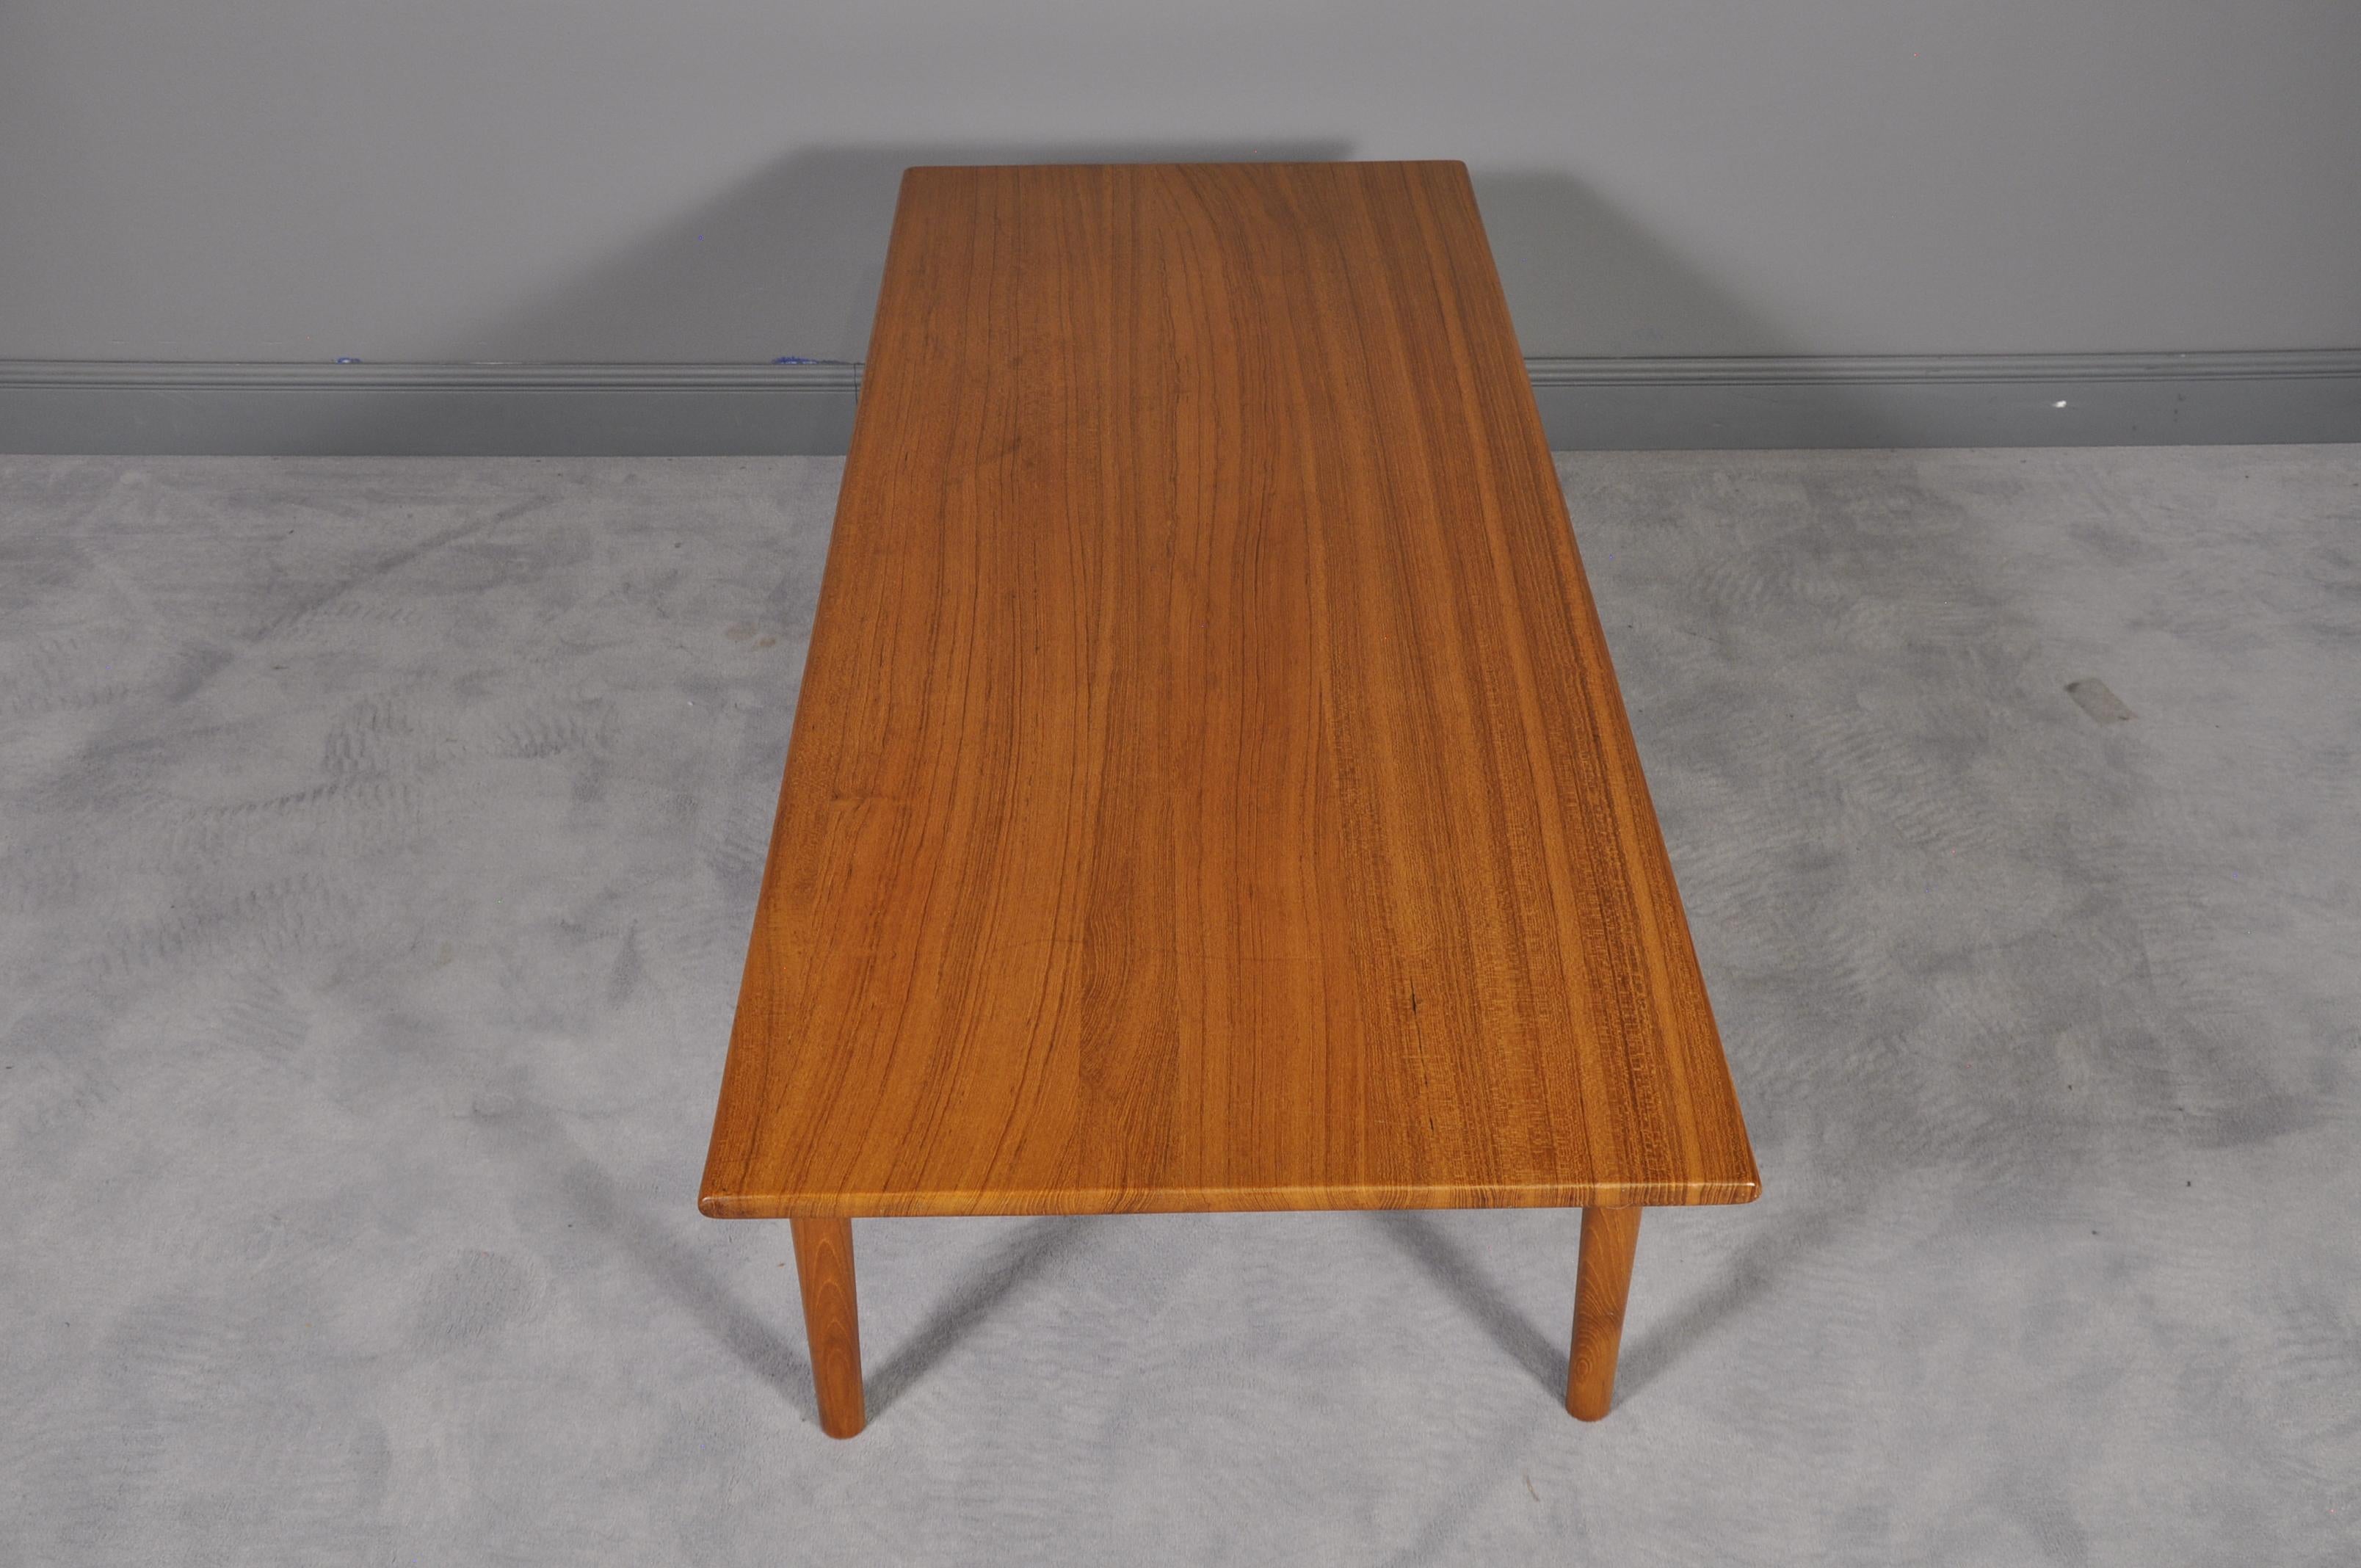 Scandinavian Modern AT-15 Coffee Table by Hans J. Wegner for Andreas Tuck, 1960s For Sale